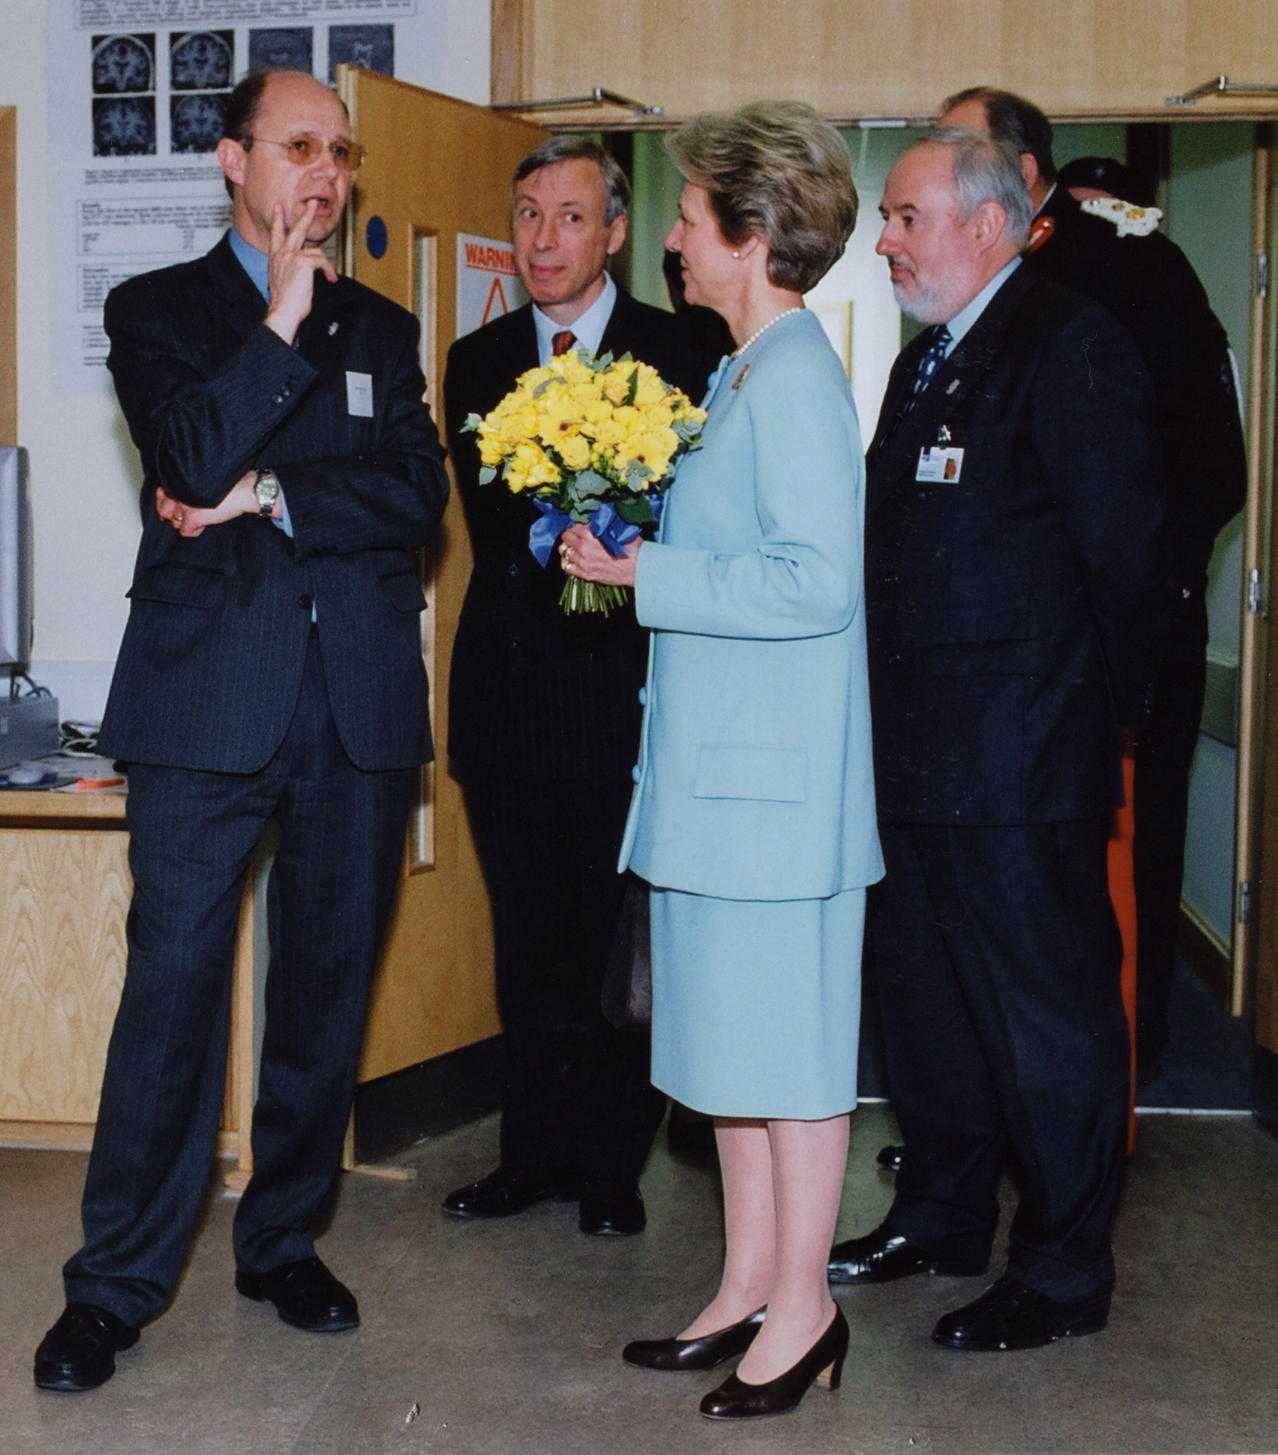 The Duchess of Gloucester opens the Sir William Gowers Centre, meeting Professor john Duncan, President of the Society Earl Howe and former Chief Executive Graham Faulkner